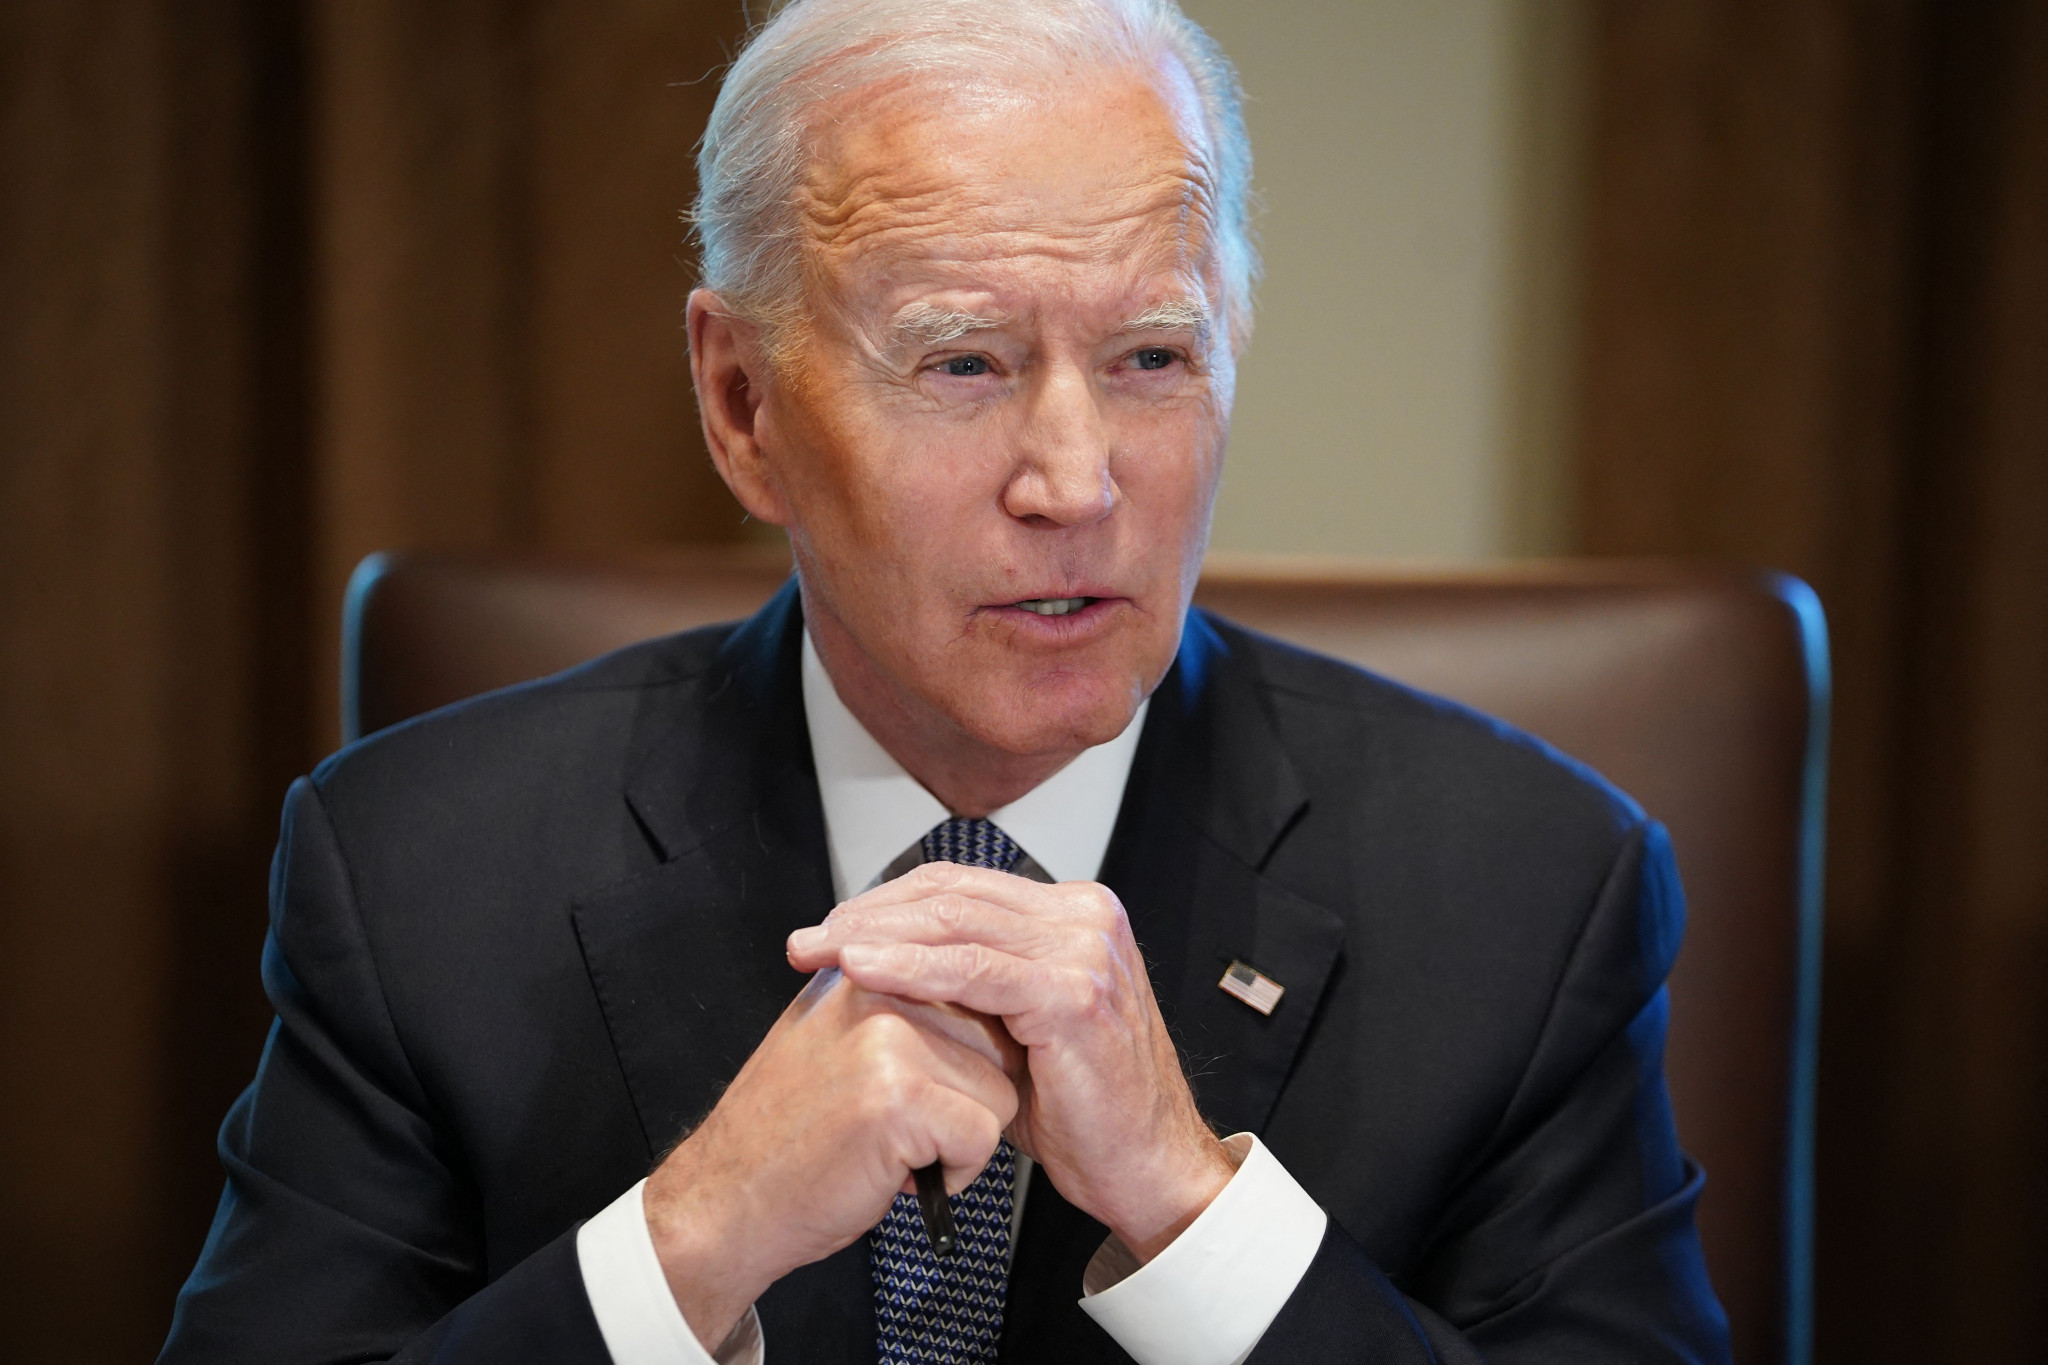 US President Biden confirms support for Rugby World Cup bids in 2031 and 2033